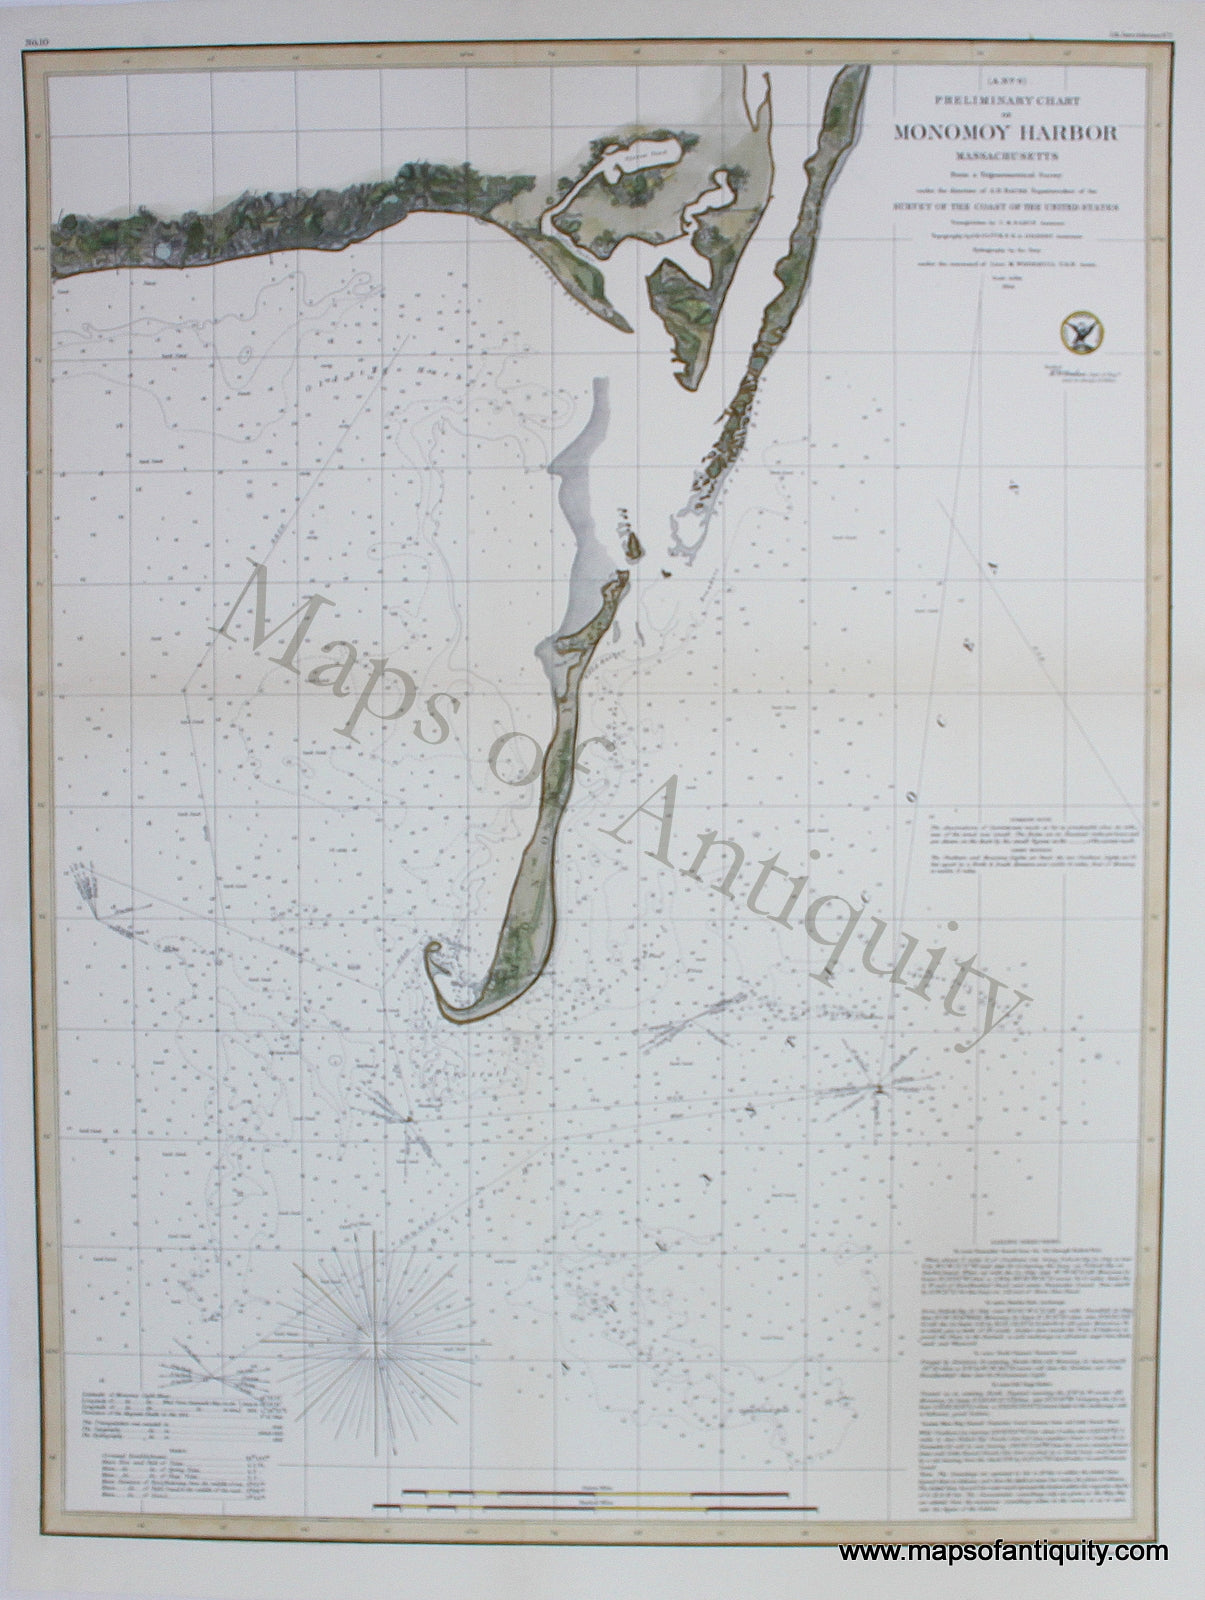 Reproduction-Preliminary-Chart-of-Monomoy-Harbor-Massachusetts---Reproduction---Reproductions-Cape-Cod-and-Islands-Reproduction-US-Coast-Survey-Maps-Of-Antiquity